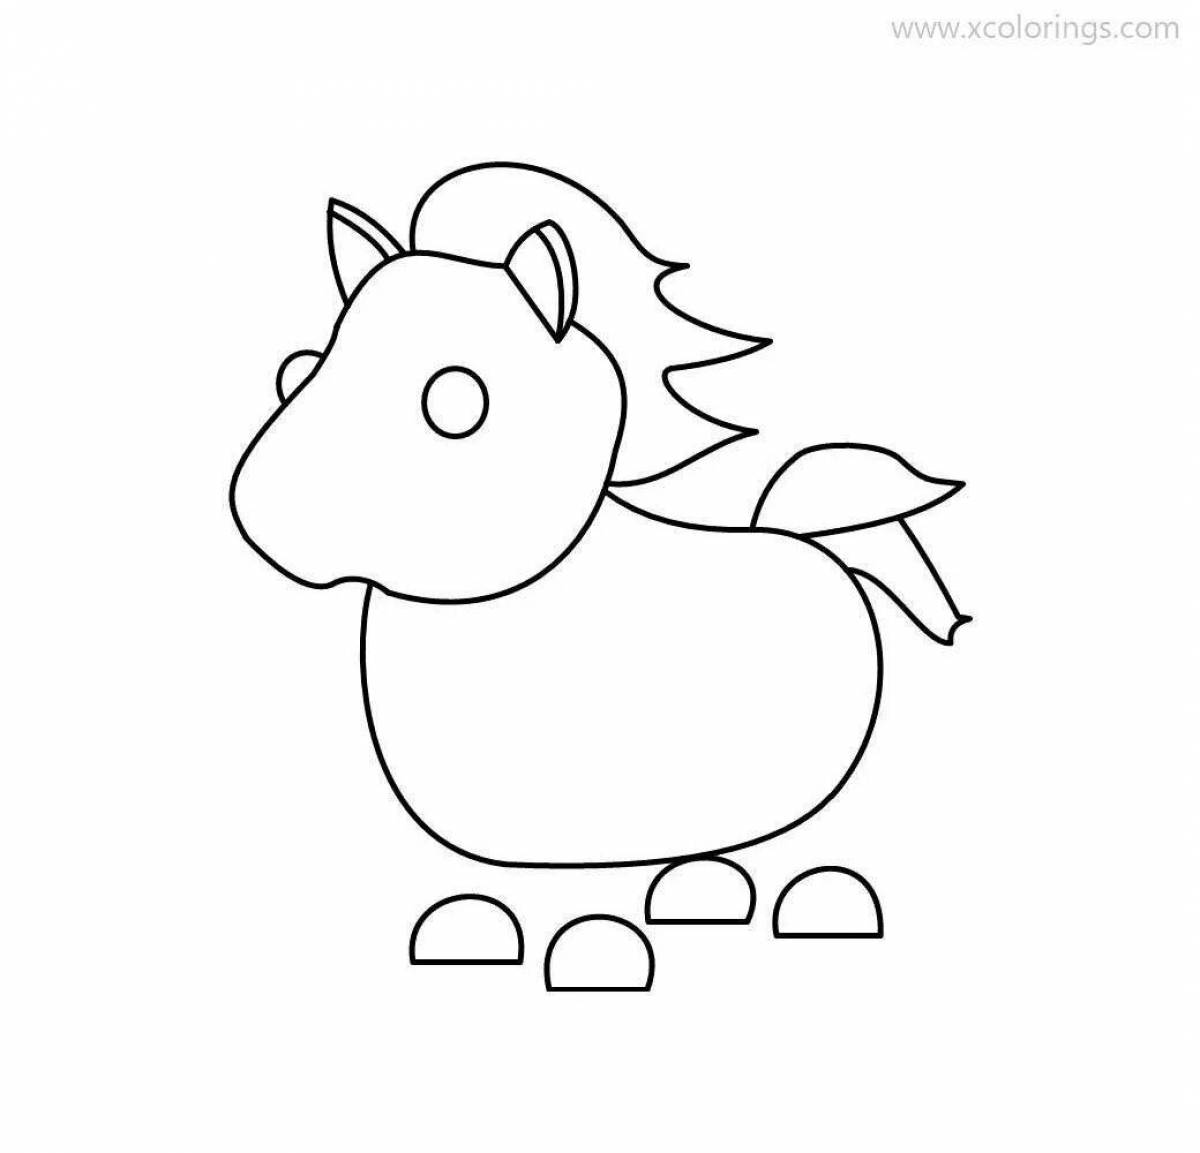 Coloring page sweet adopt me pets